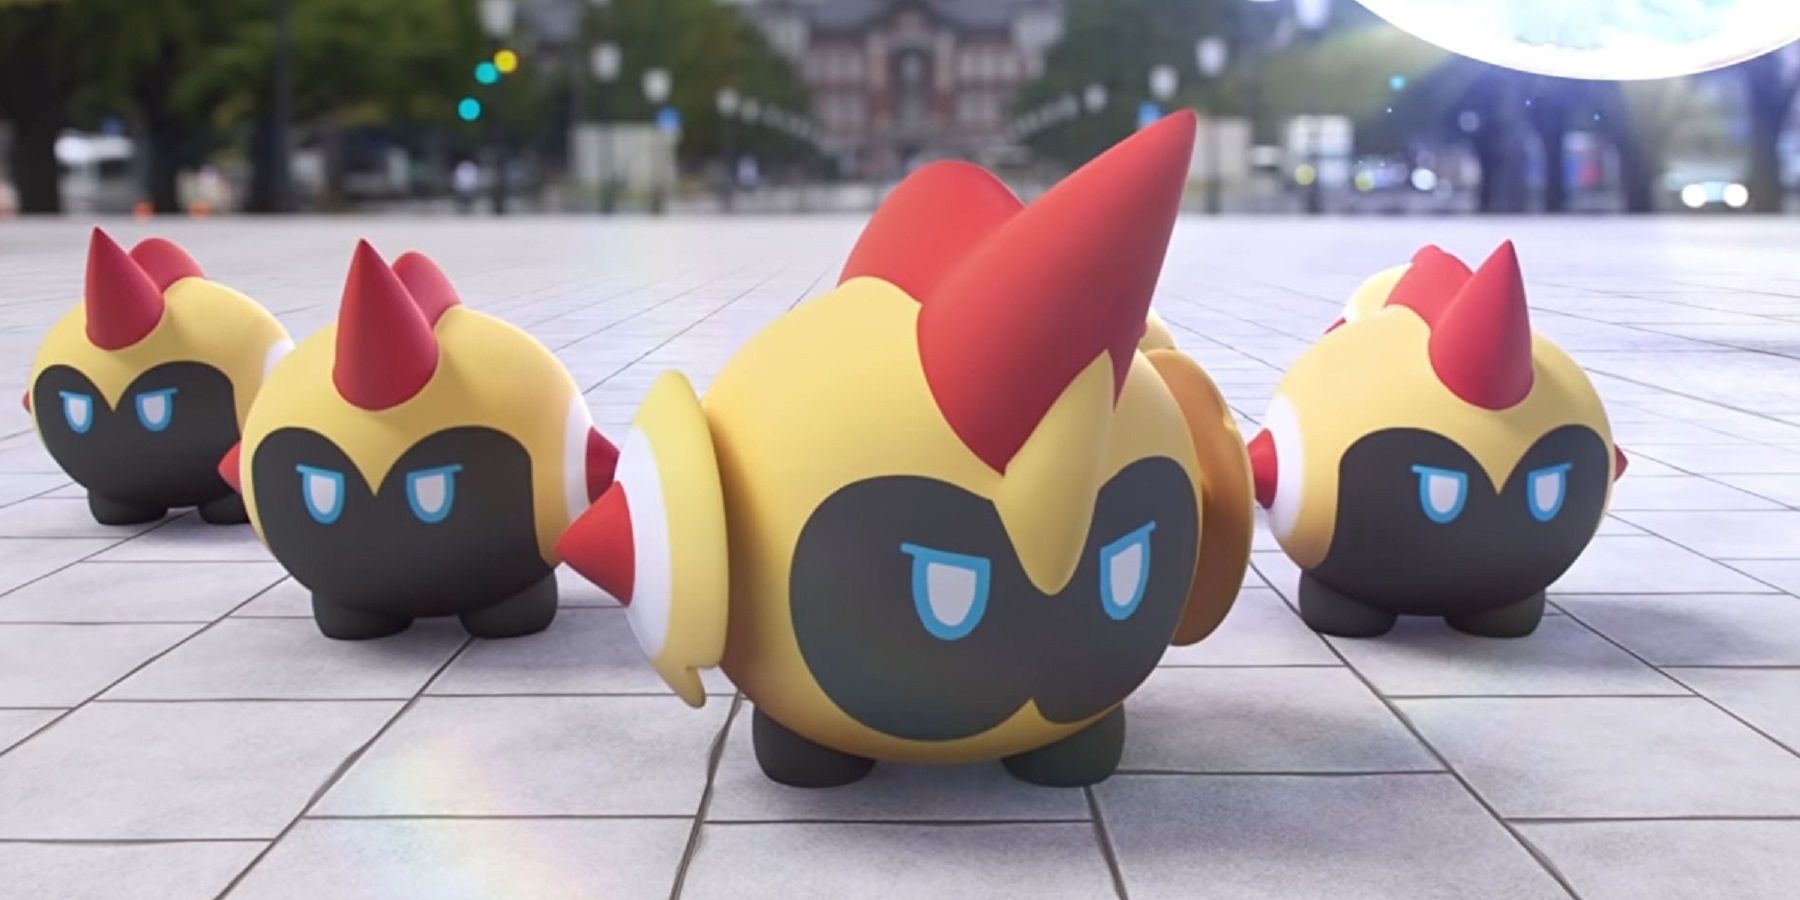 The Pokemon Falinks as it is supposed to appear in Pokemon Go.